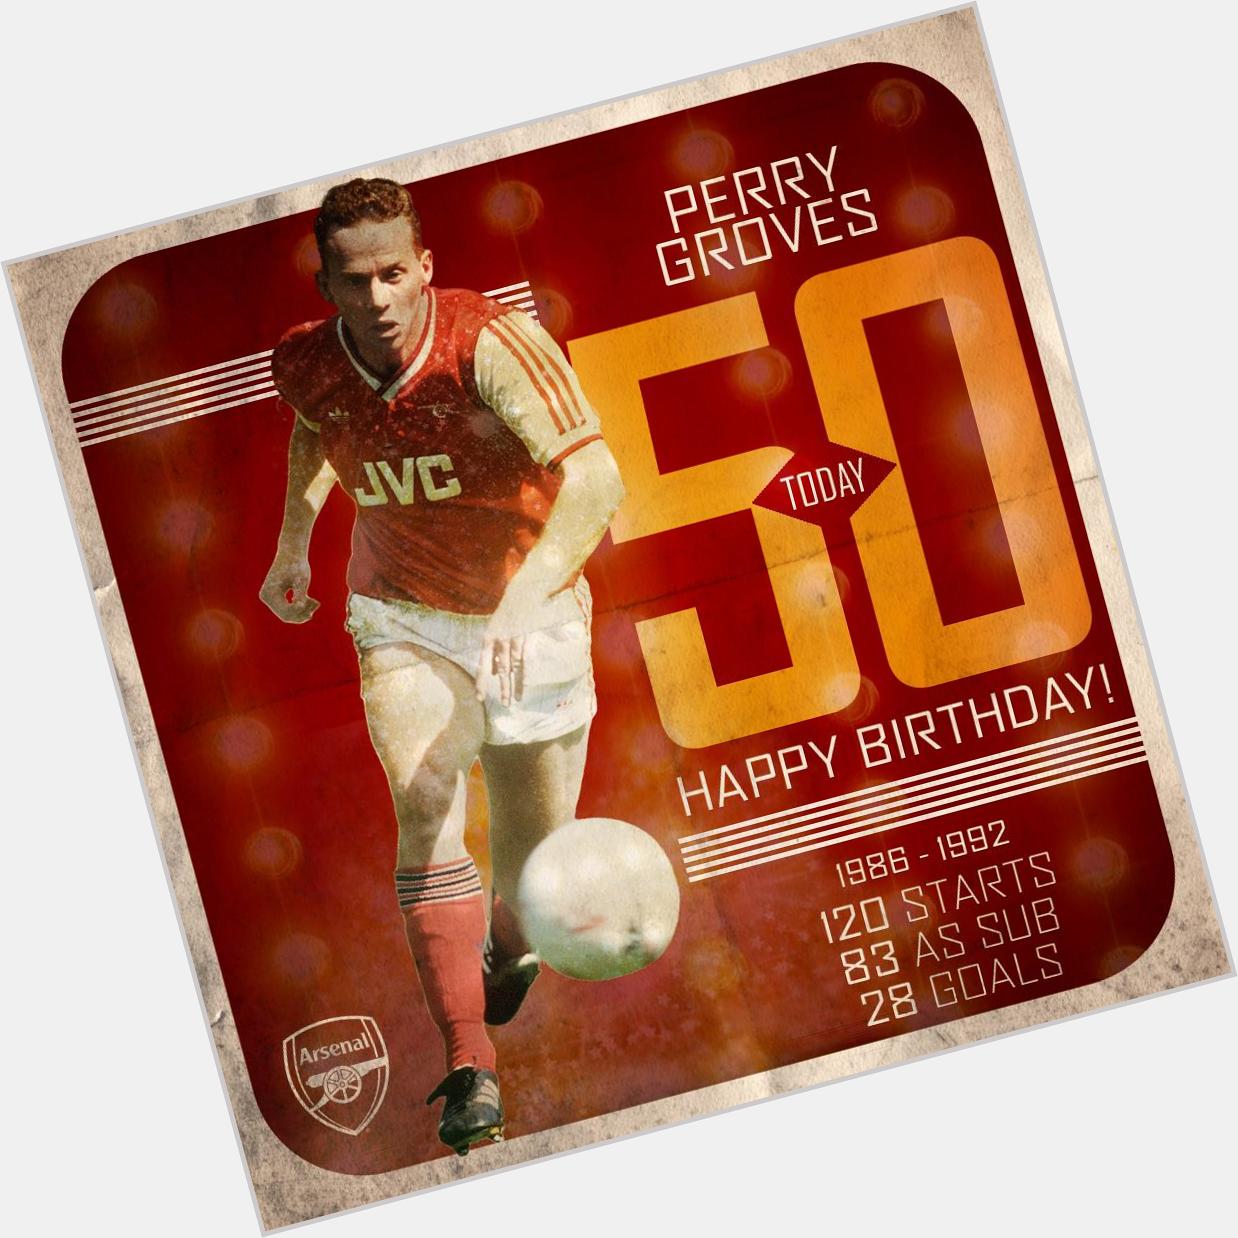 Happy 50th birthday to legend Perry Groves! Send him your messages using 